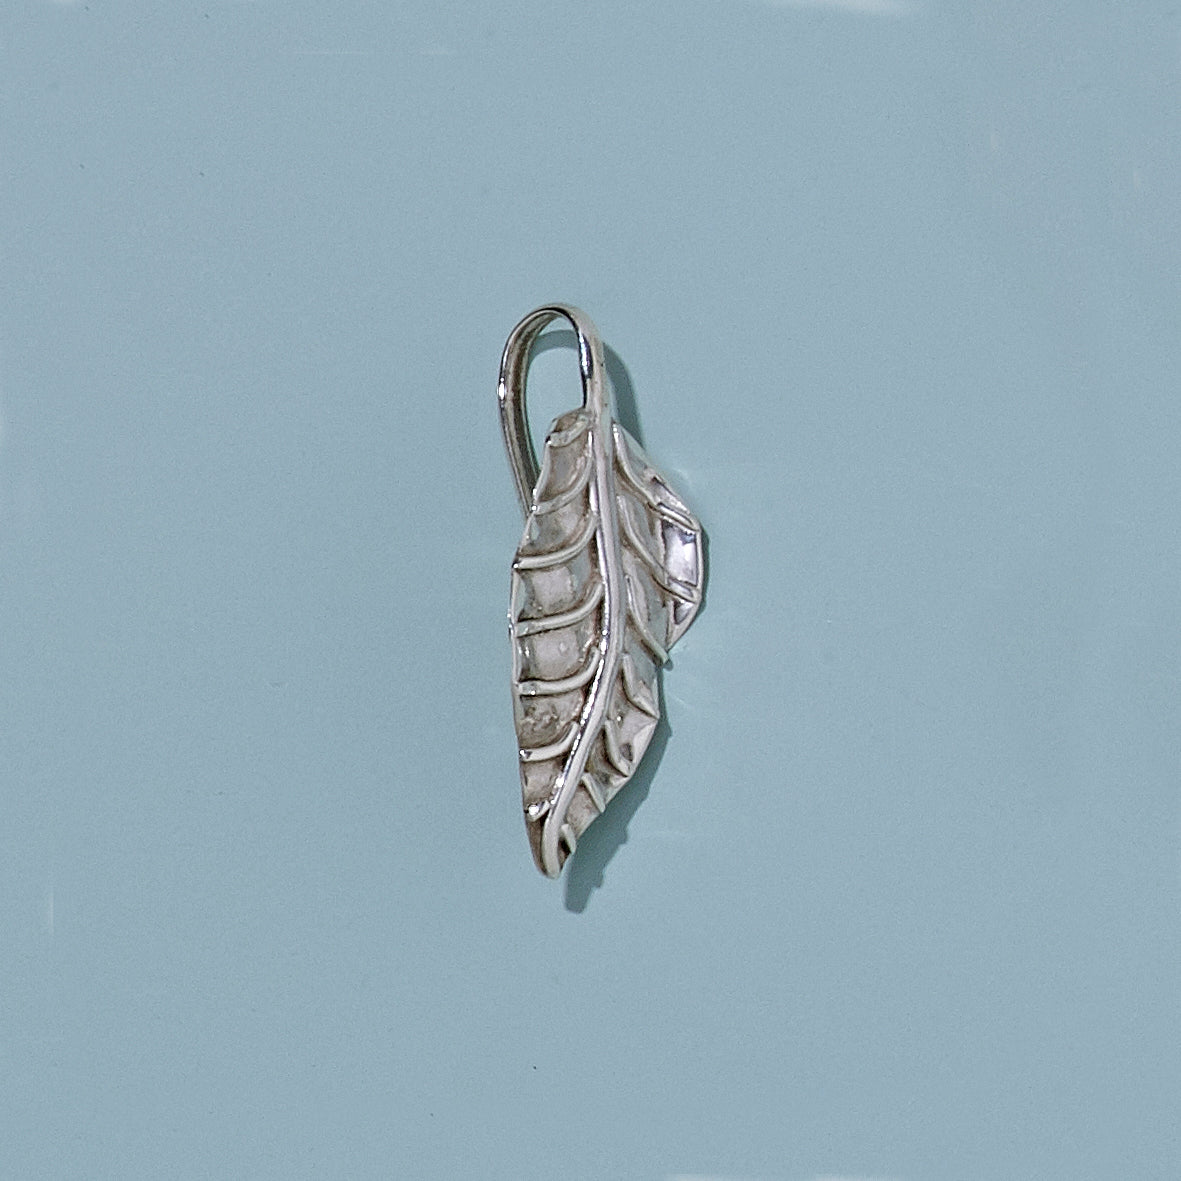 Curled Autumn Leaf Charm Small Sterling Silver